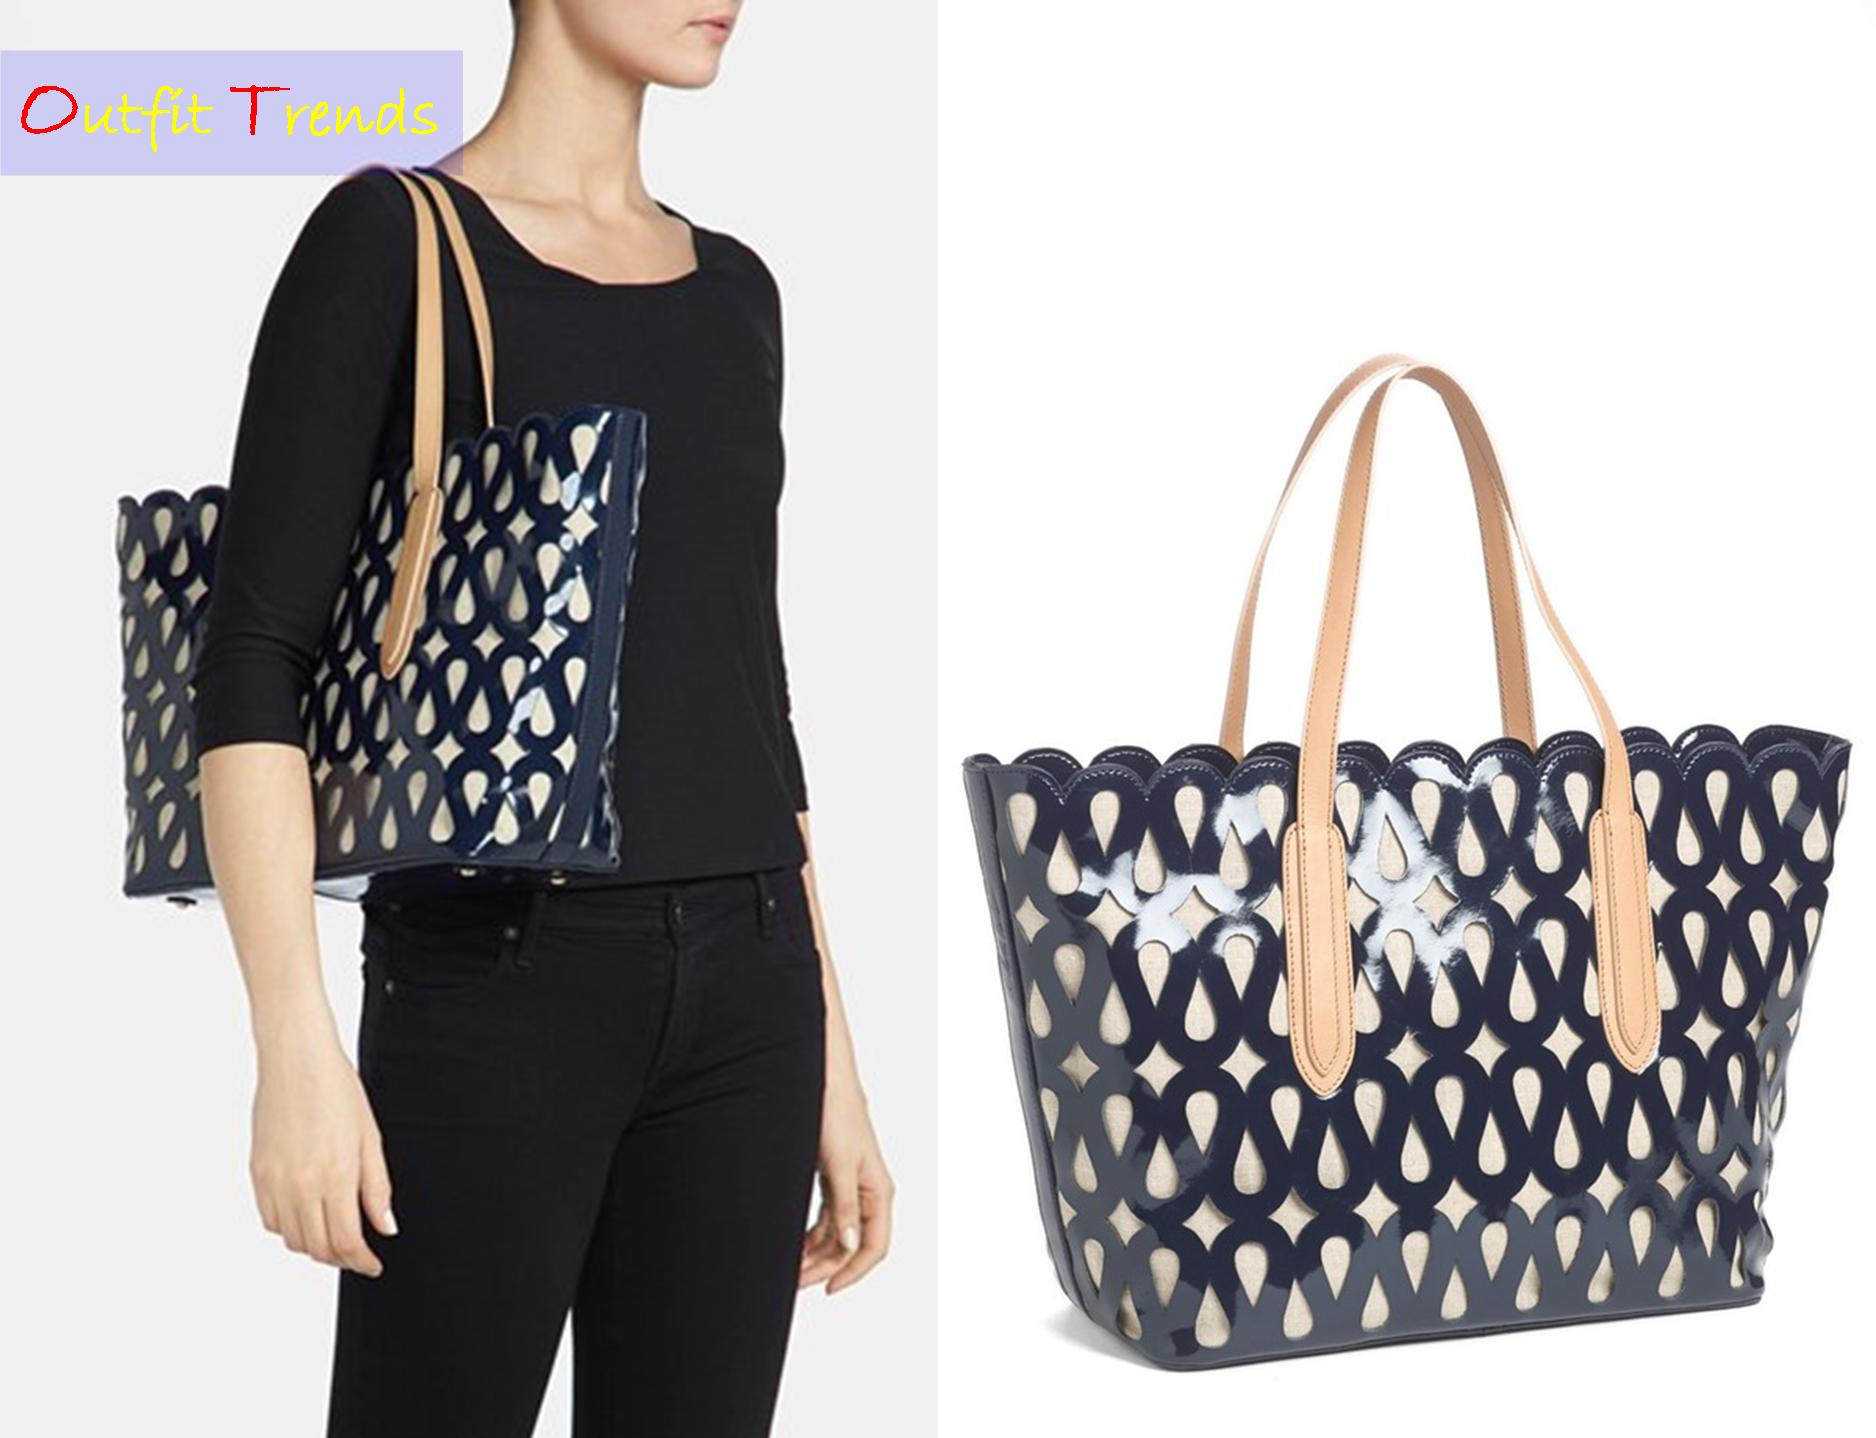 13 Most Fashionable and Stylish Tote Bags for Women